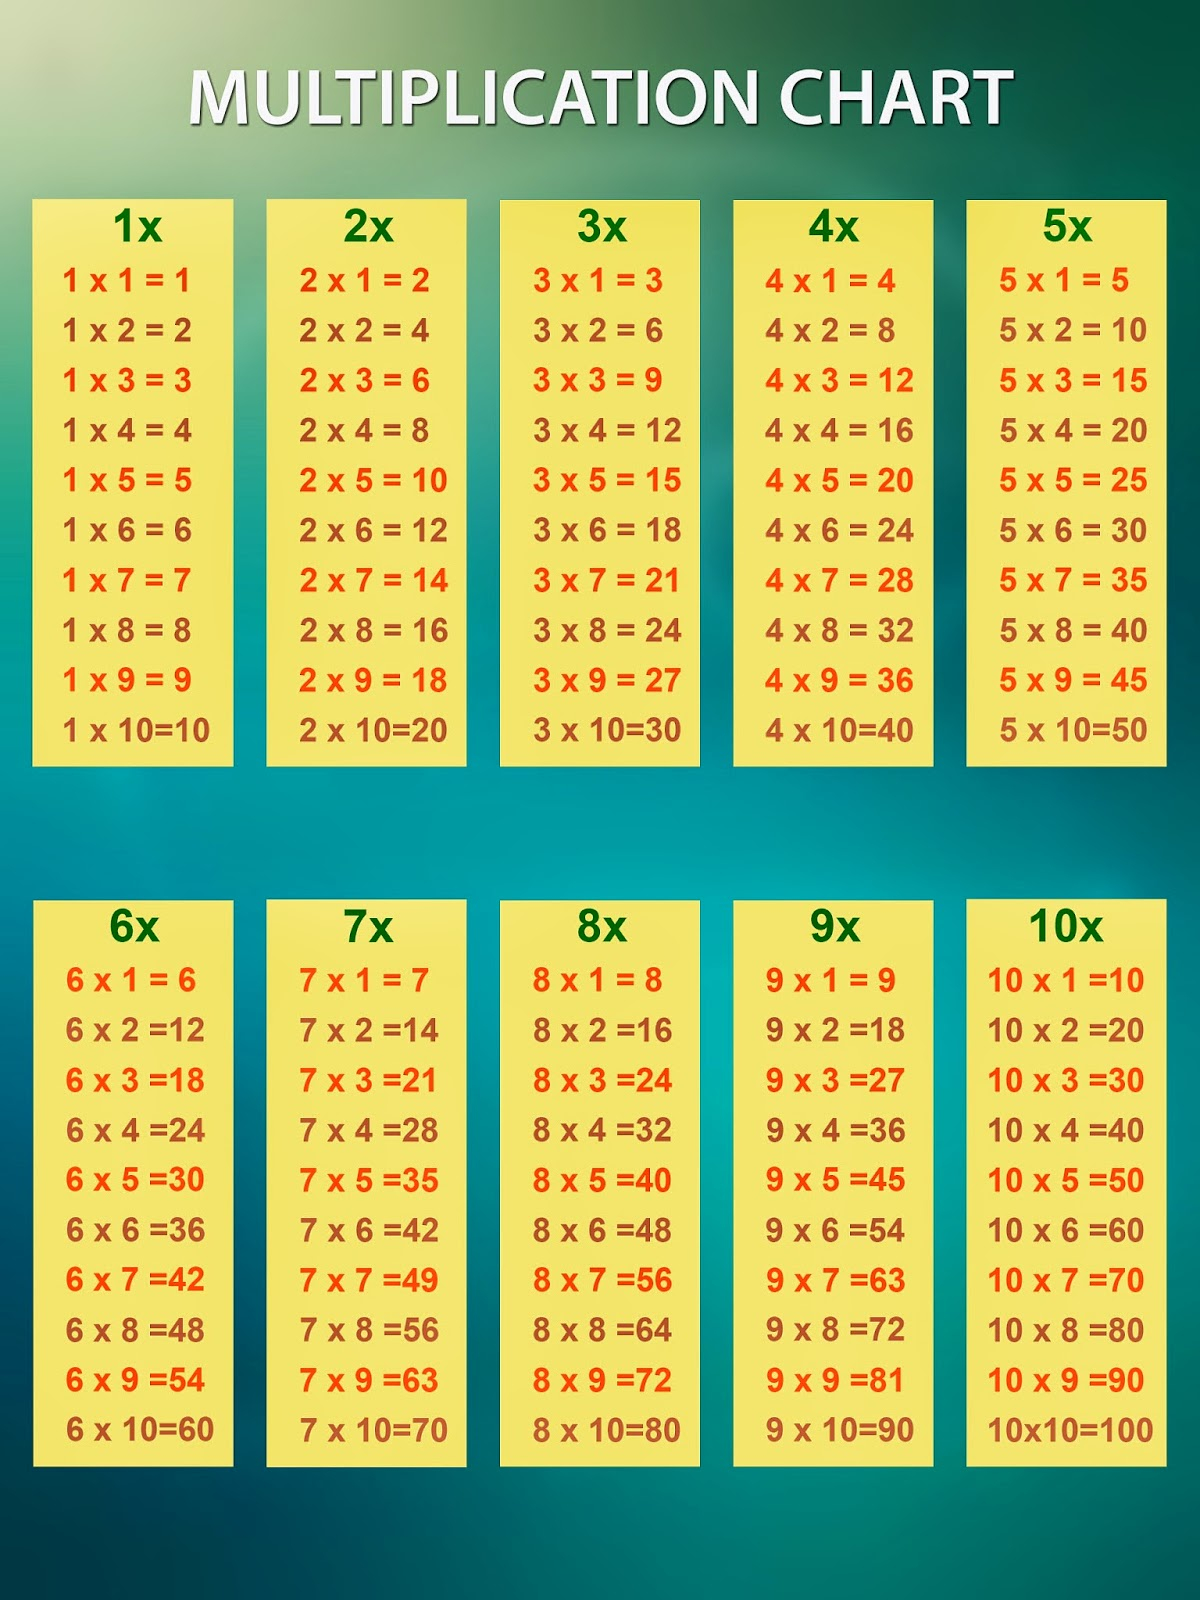 A Multiplication Chart - Gallery Of Chart 2019